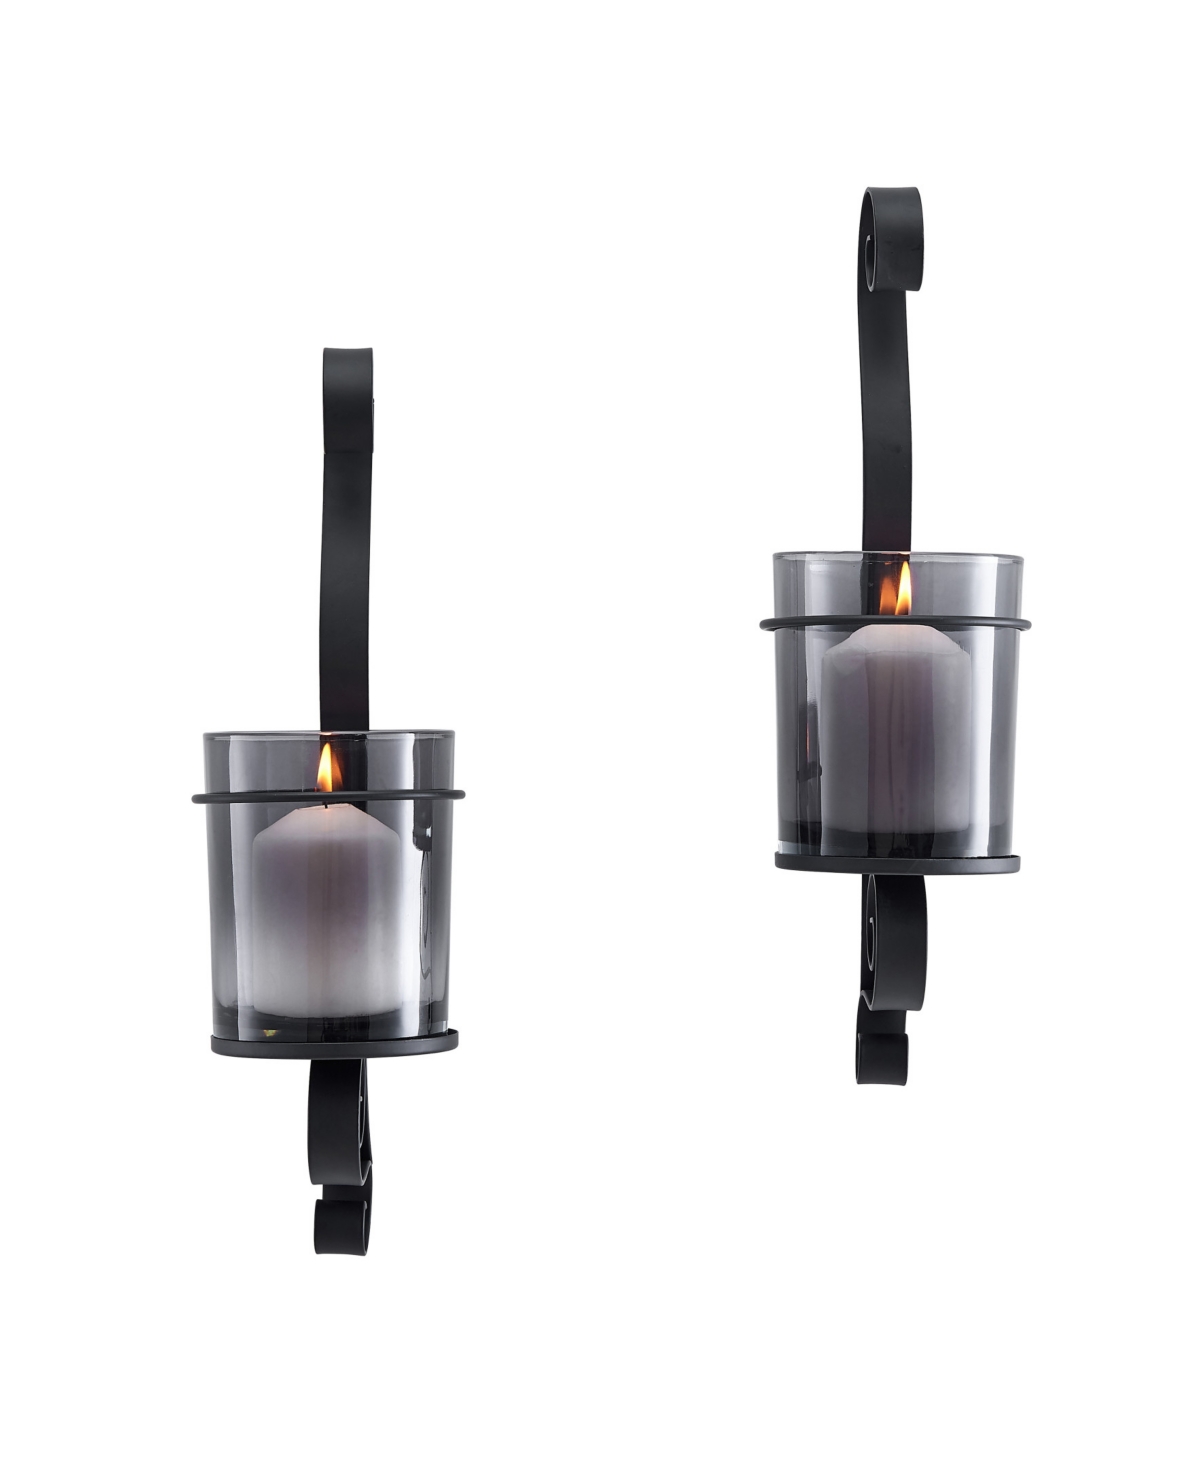 Danya B Vintage-like Wall Sconce 2-piece Candle Holder Set With Smoke Glass Hurricanes In Black